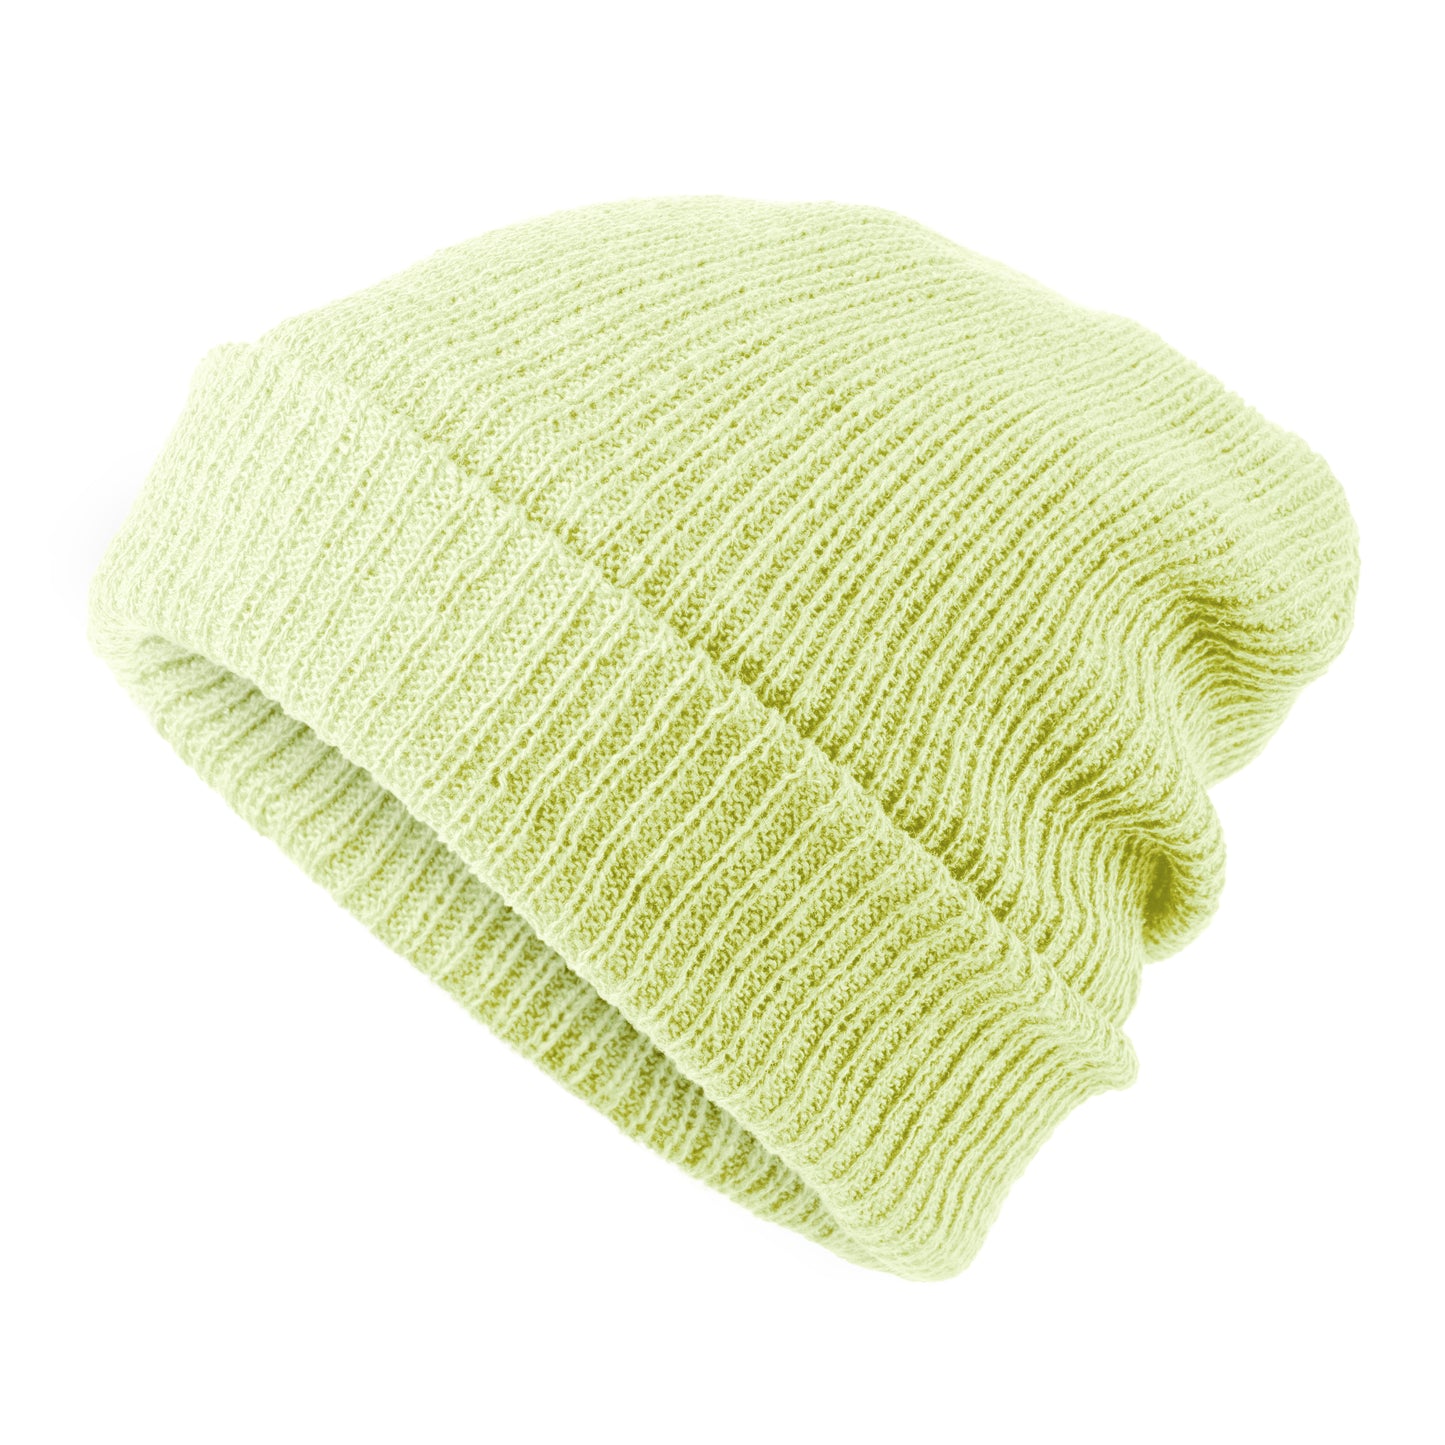 Mens and Women Fleece Lined Beanie Hat - Cold Winter Hat